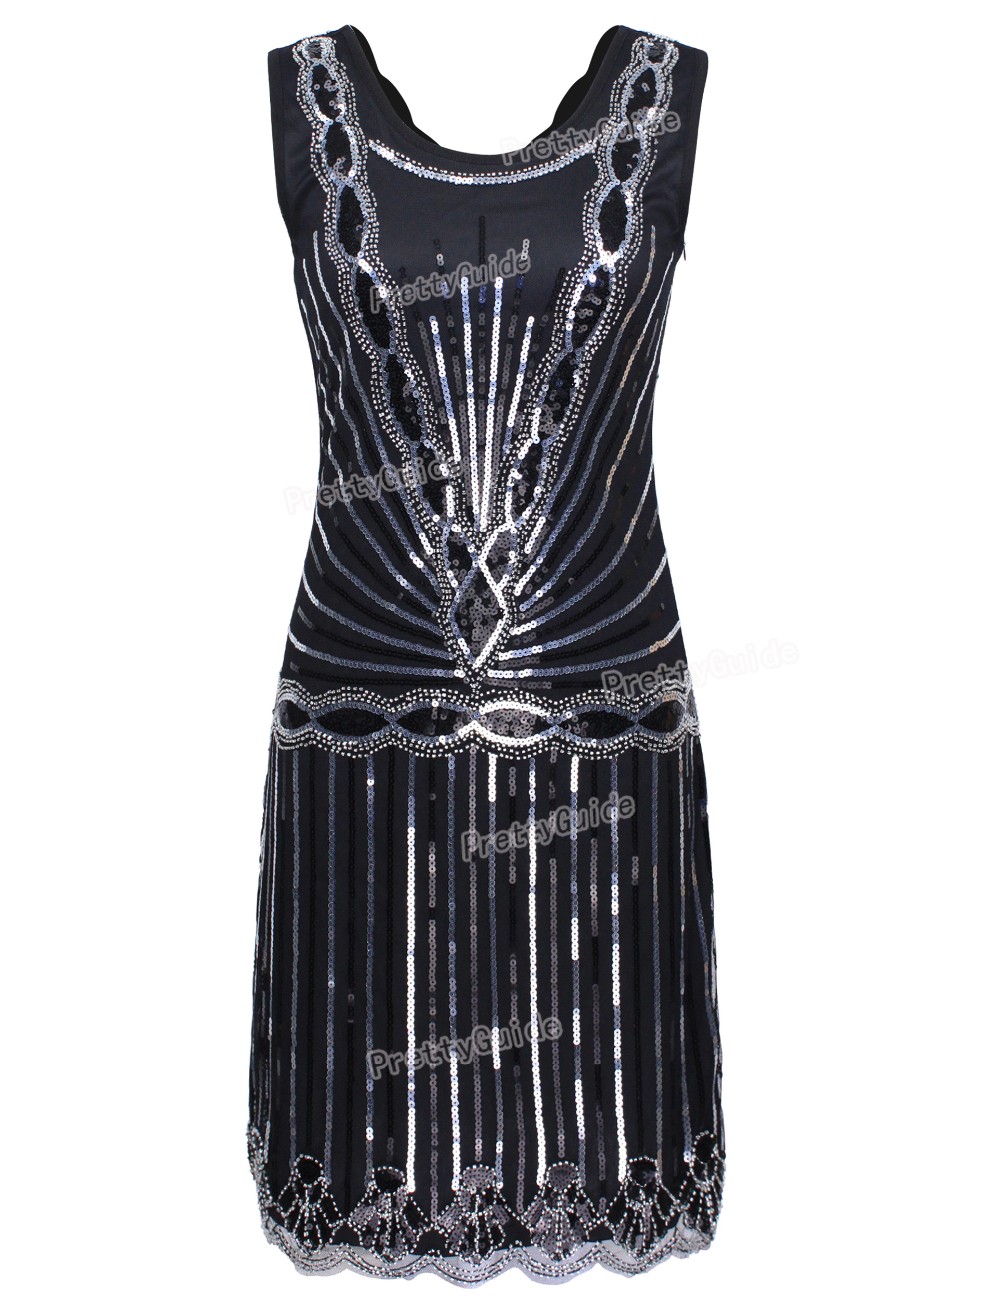 PrettyGuide-Women-1920s-Vintage-Art-Deco-Sequin-Inspired-Great-Gatsby-Flapper-Cocktail-Party-Dress-32634772225